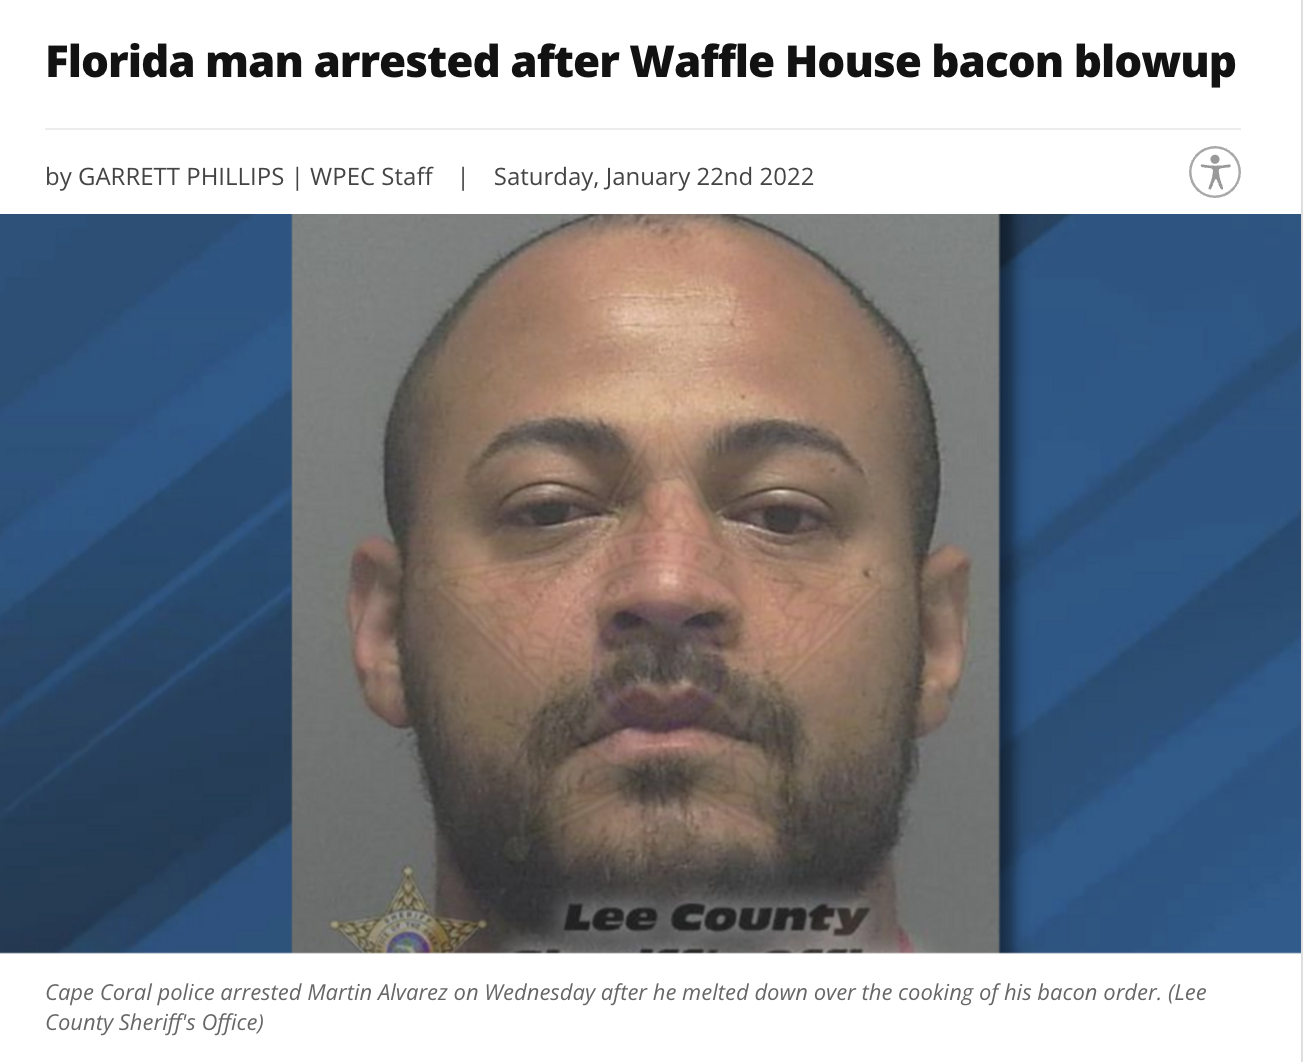 Best of Florida Man 2022 - police florida man - Florida man arrested after Waffle House bacon blowup by Garrett Phillips | Wpec Staff | Saturday, January 22nd 2022 Lee County Cape Coral police arrested Martin Alvarez on Wednesday after he melted down over